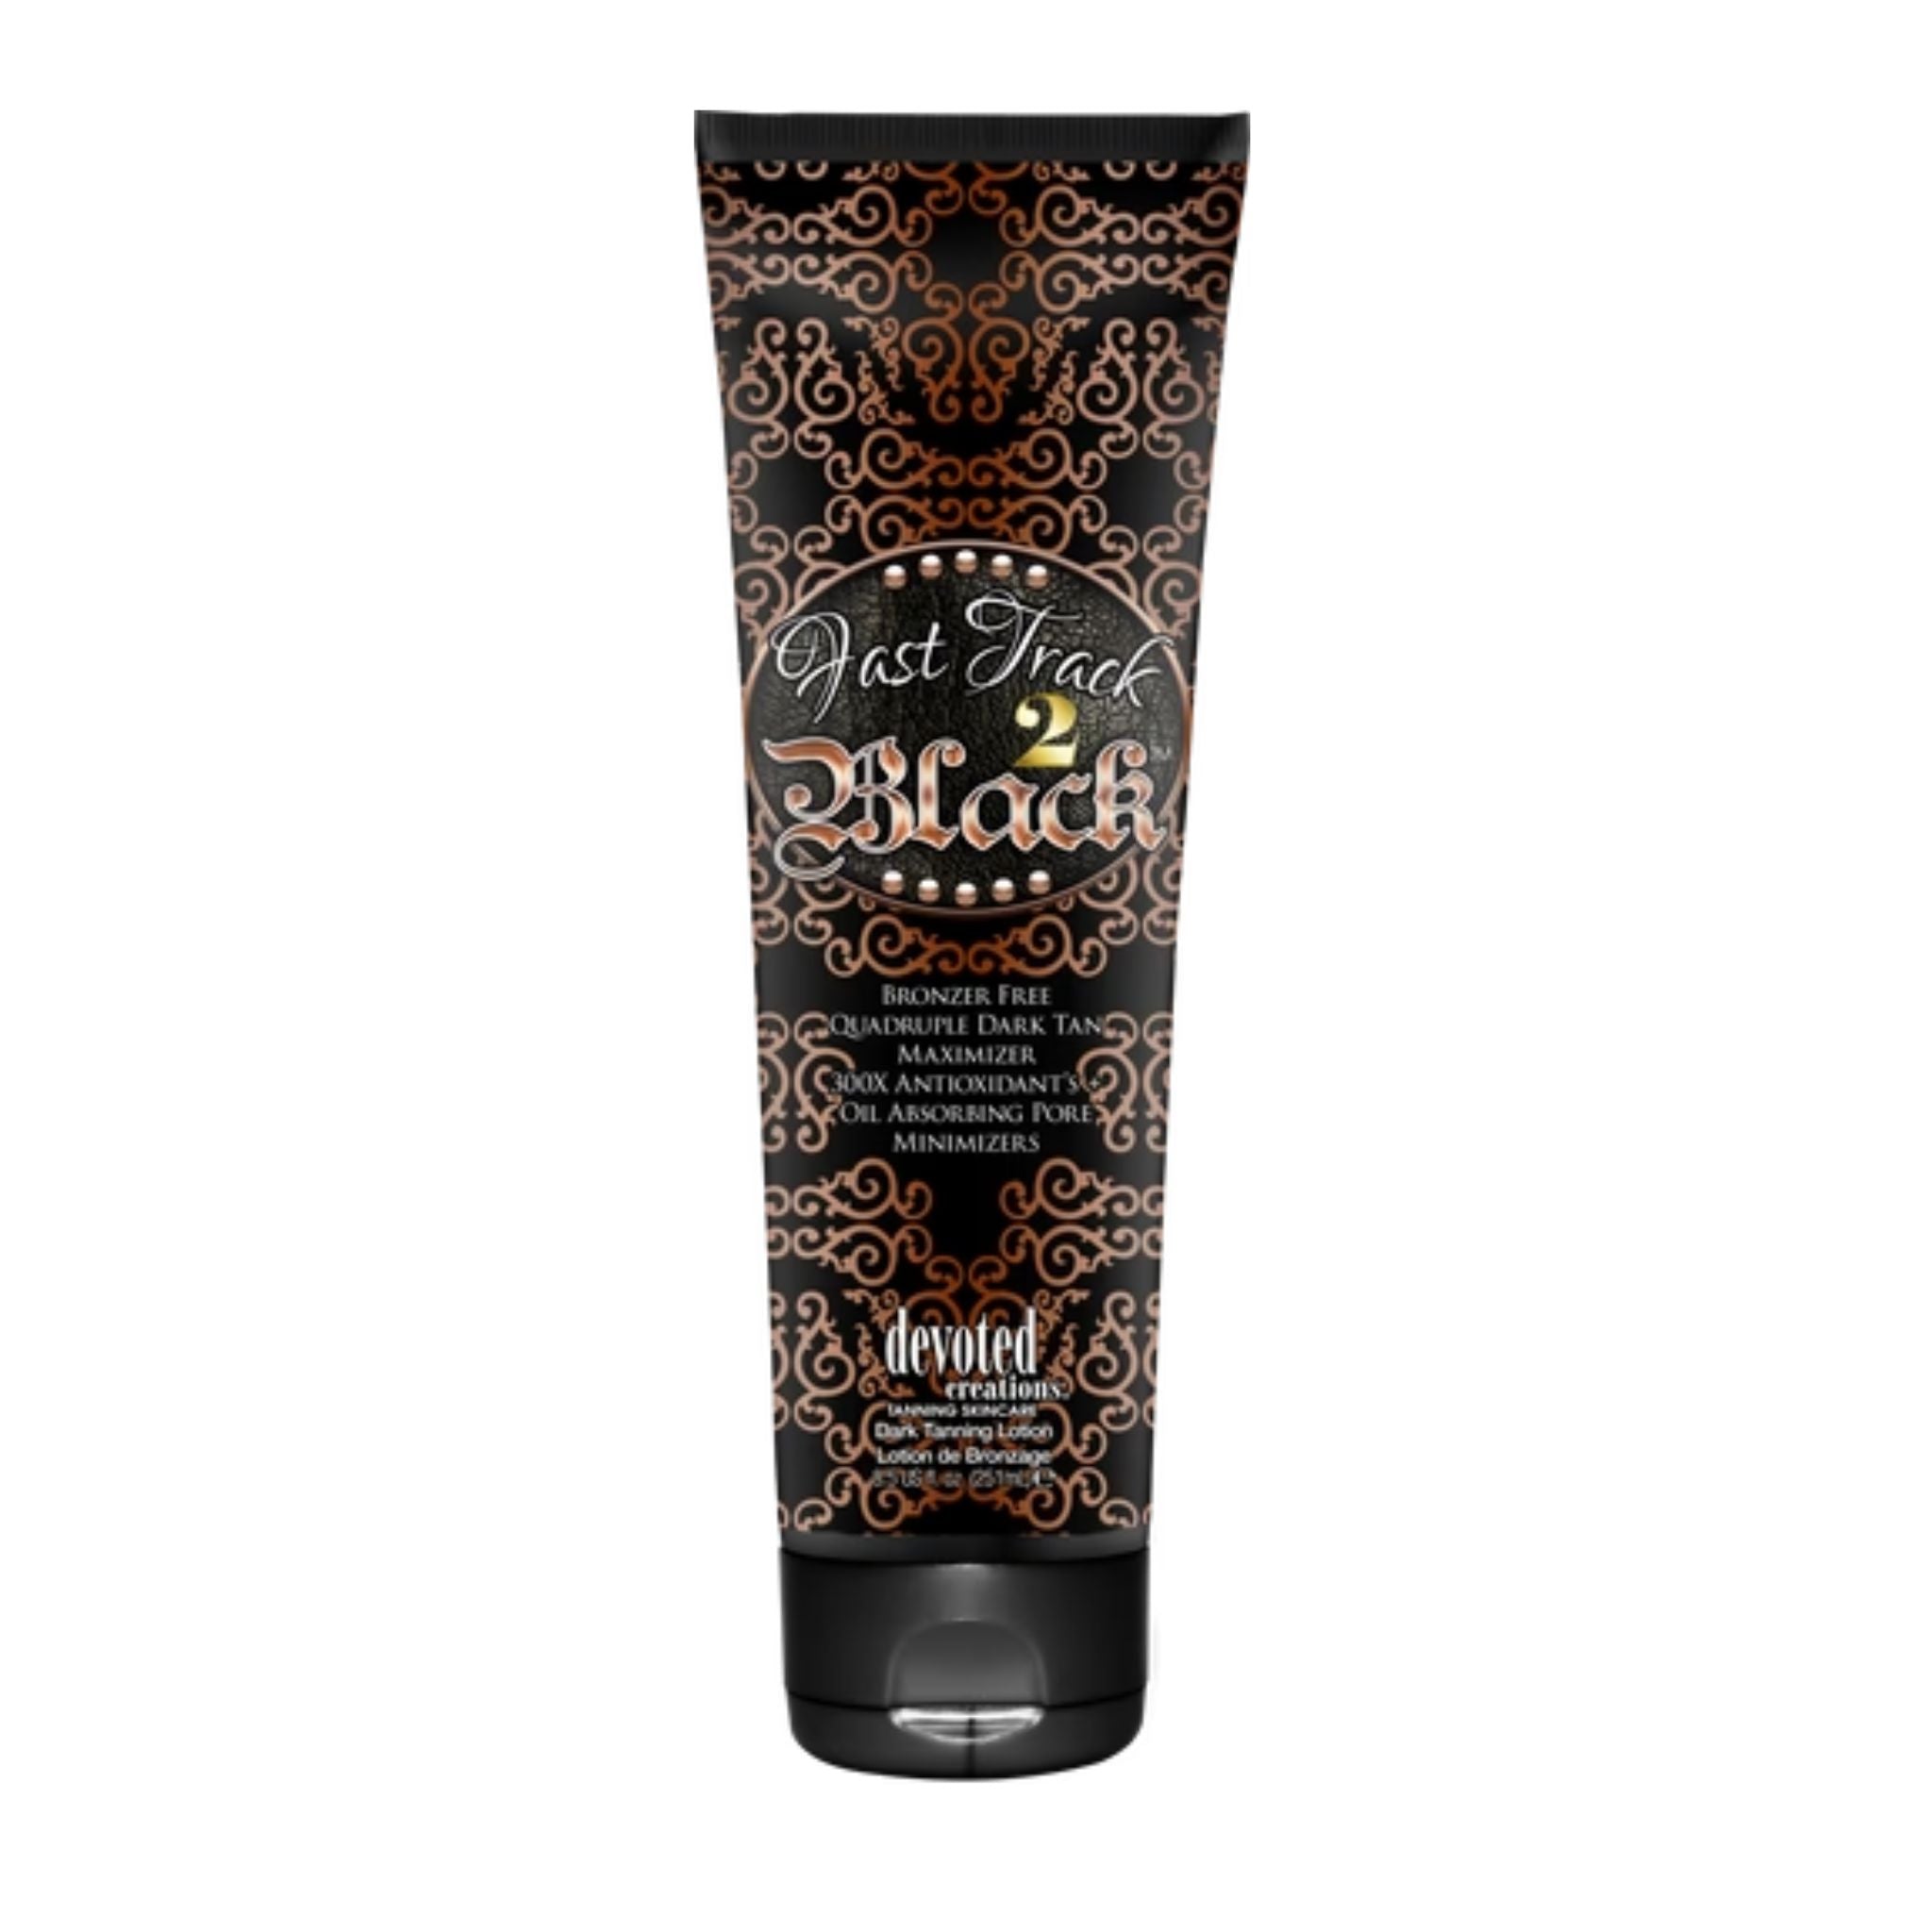 Devoted Creations Fast Track 2 Black Tanning Lotion Tanning Lotion